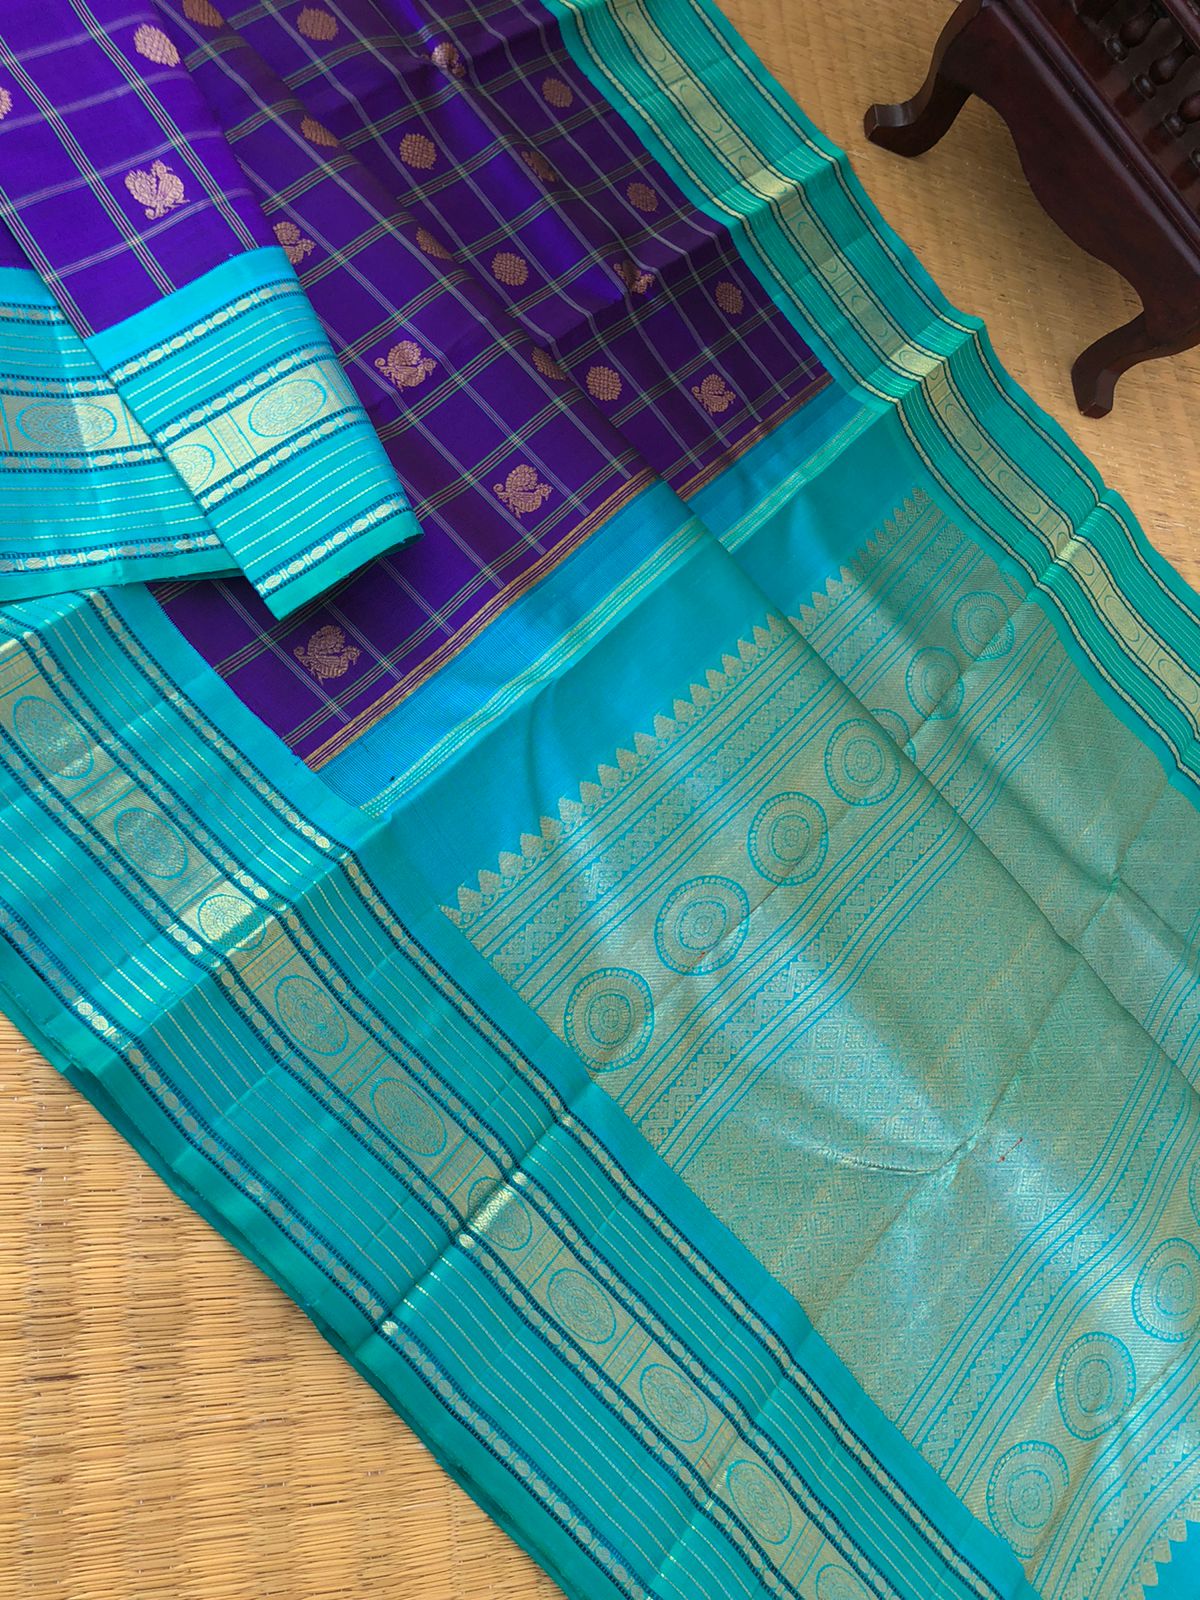 Vintage Ragas on Kanchivaram - such a stunning royal blue and teal blue Mayil chackaram woven body with korvai woven borders